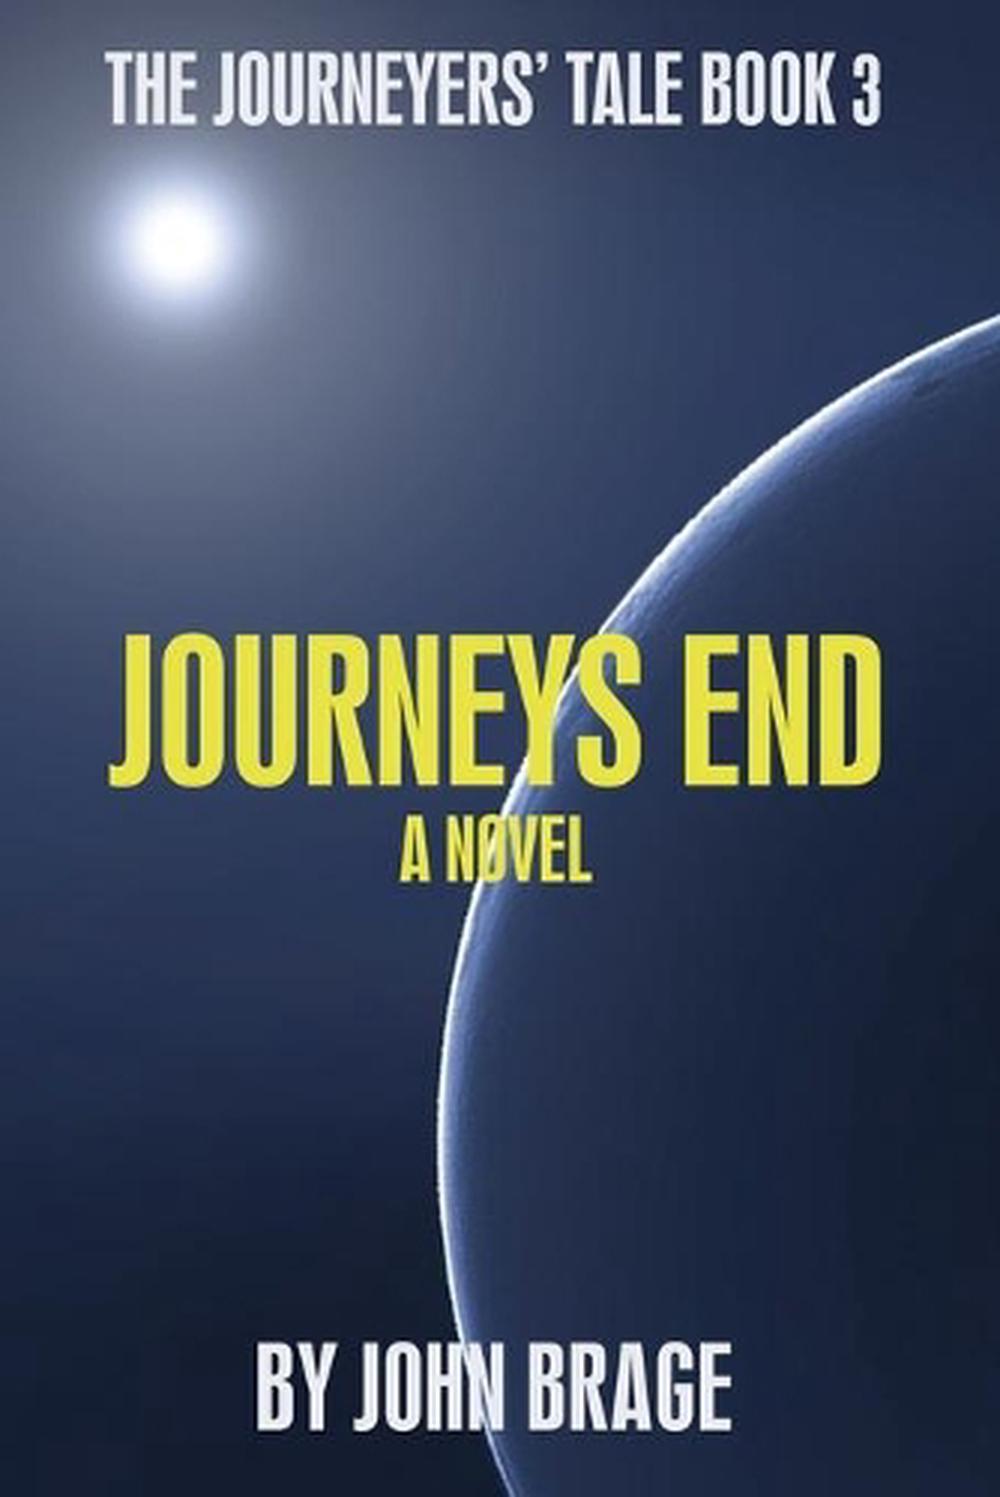 journey's end book analysis